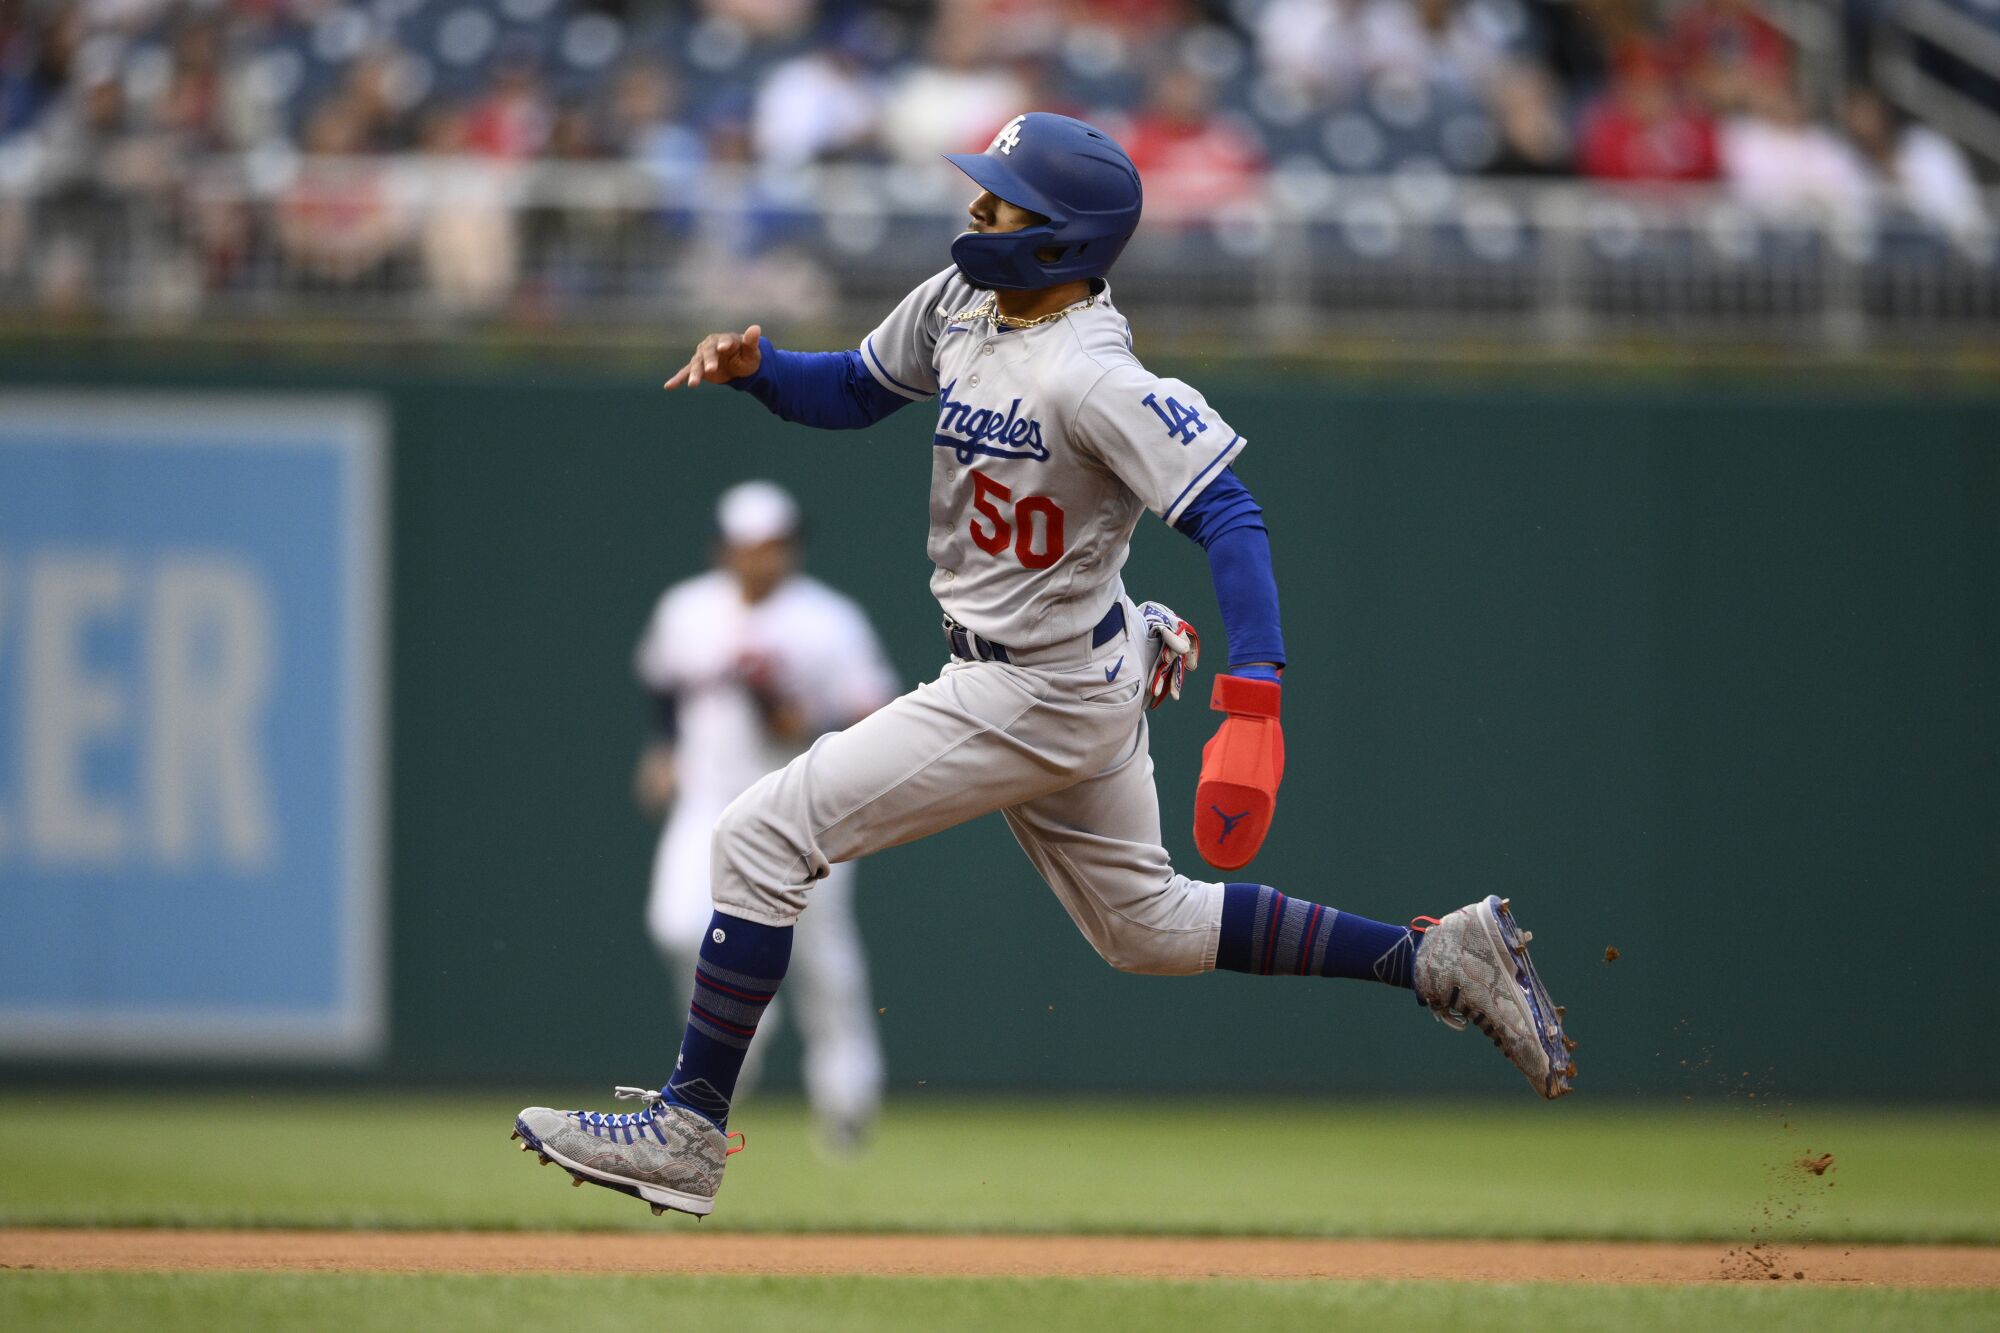 Mookie Betts has homered twice in the Dodgers game Tuesday against the Nationals. (AP Photo/Nick Wass)